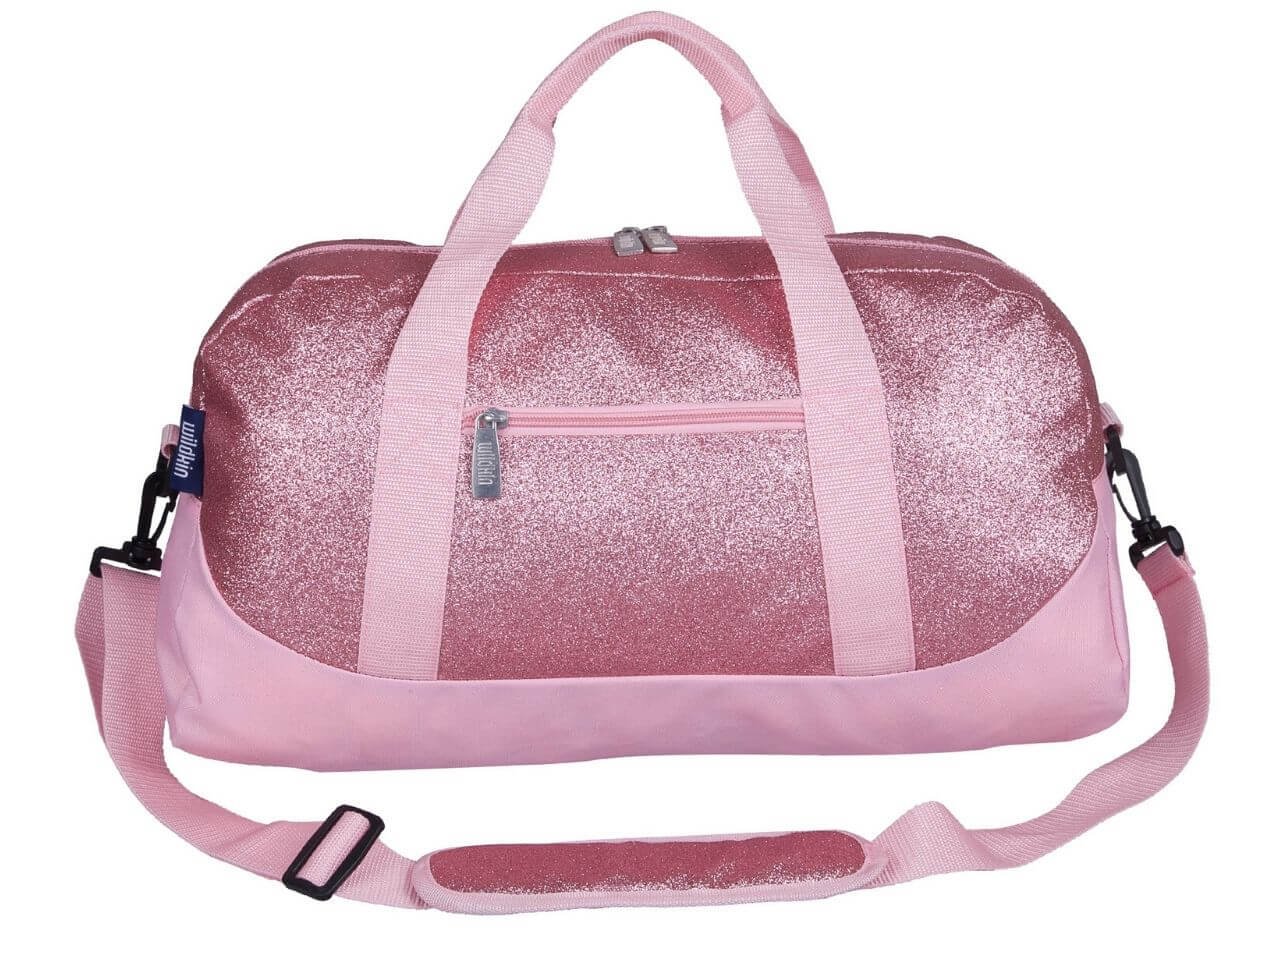 Wildkin Kids Overnighter Duffel Bags , Perfect For Sleepovers And